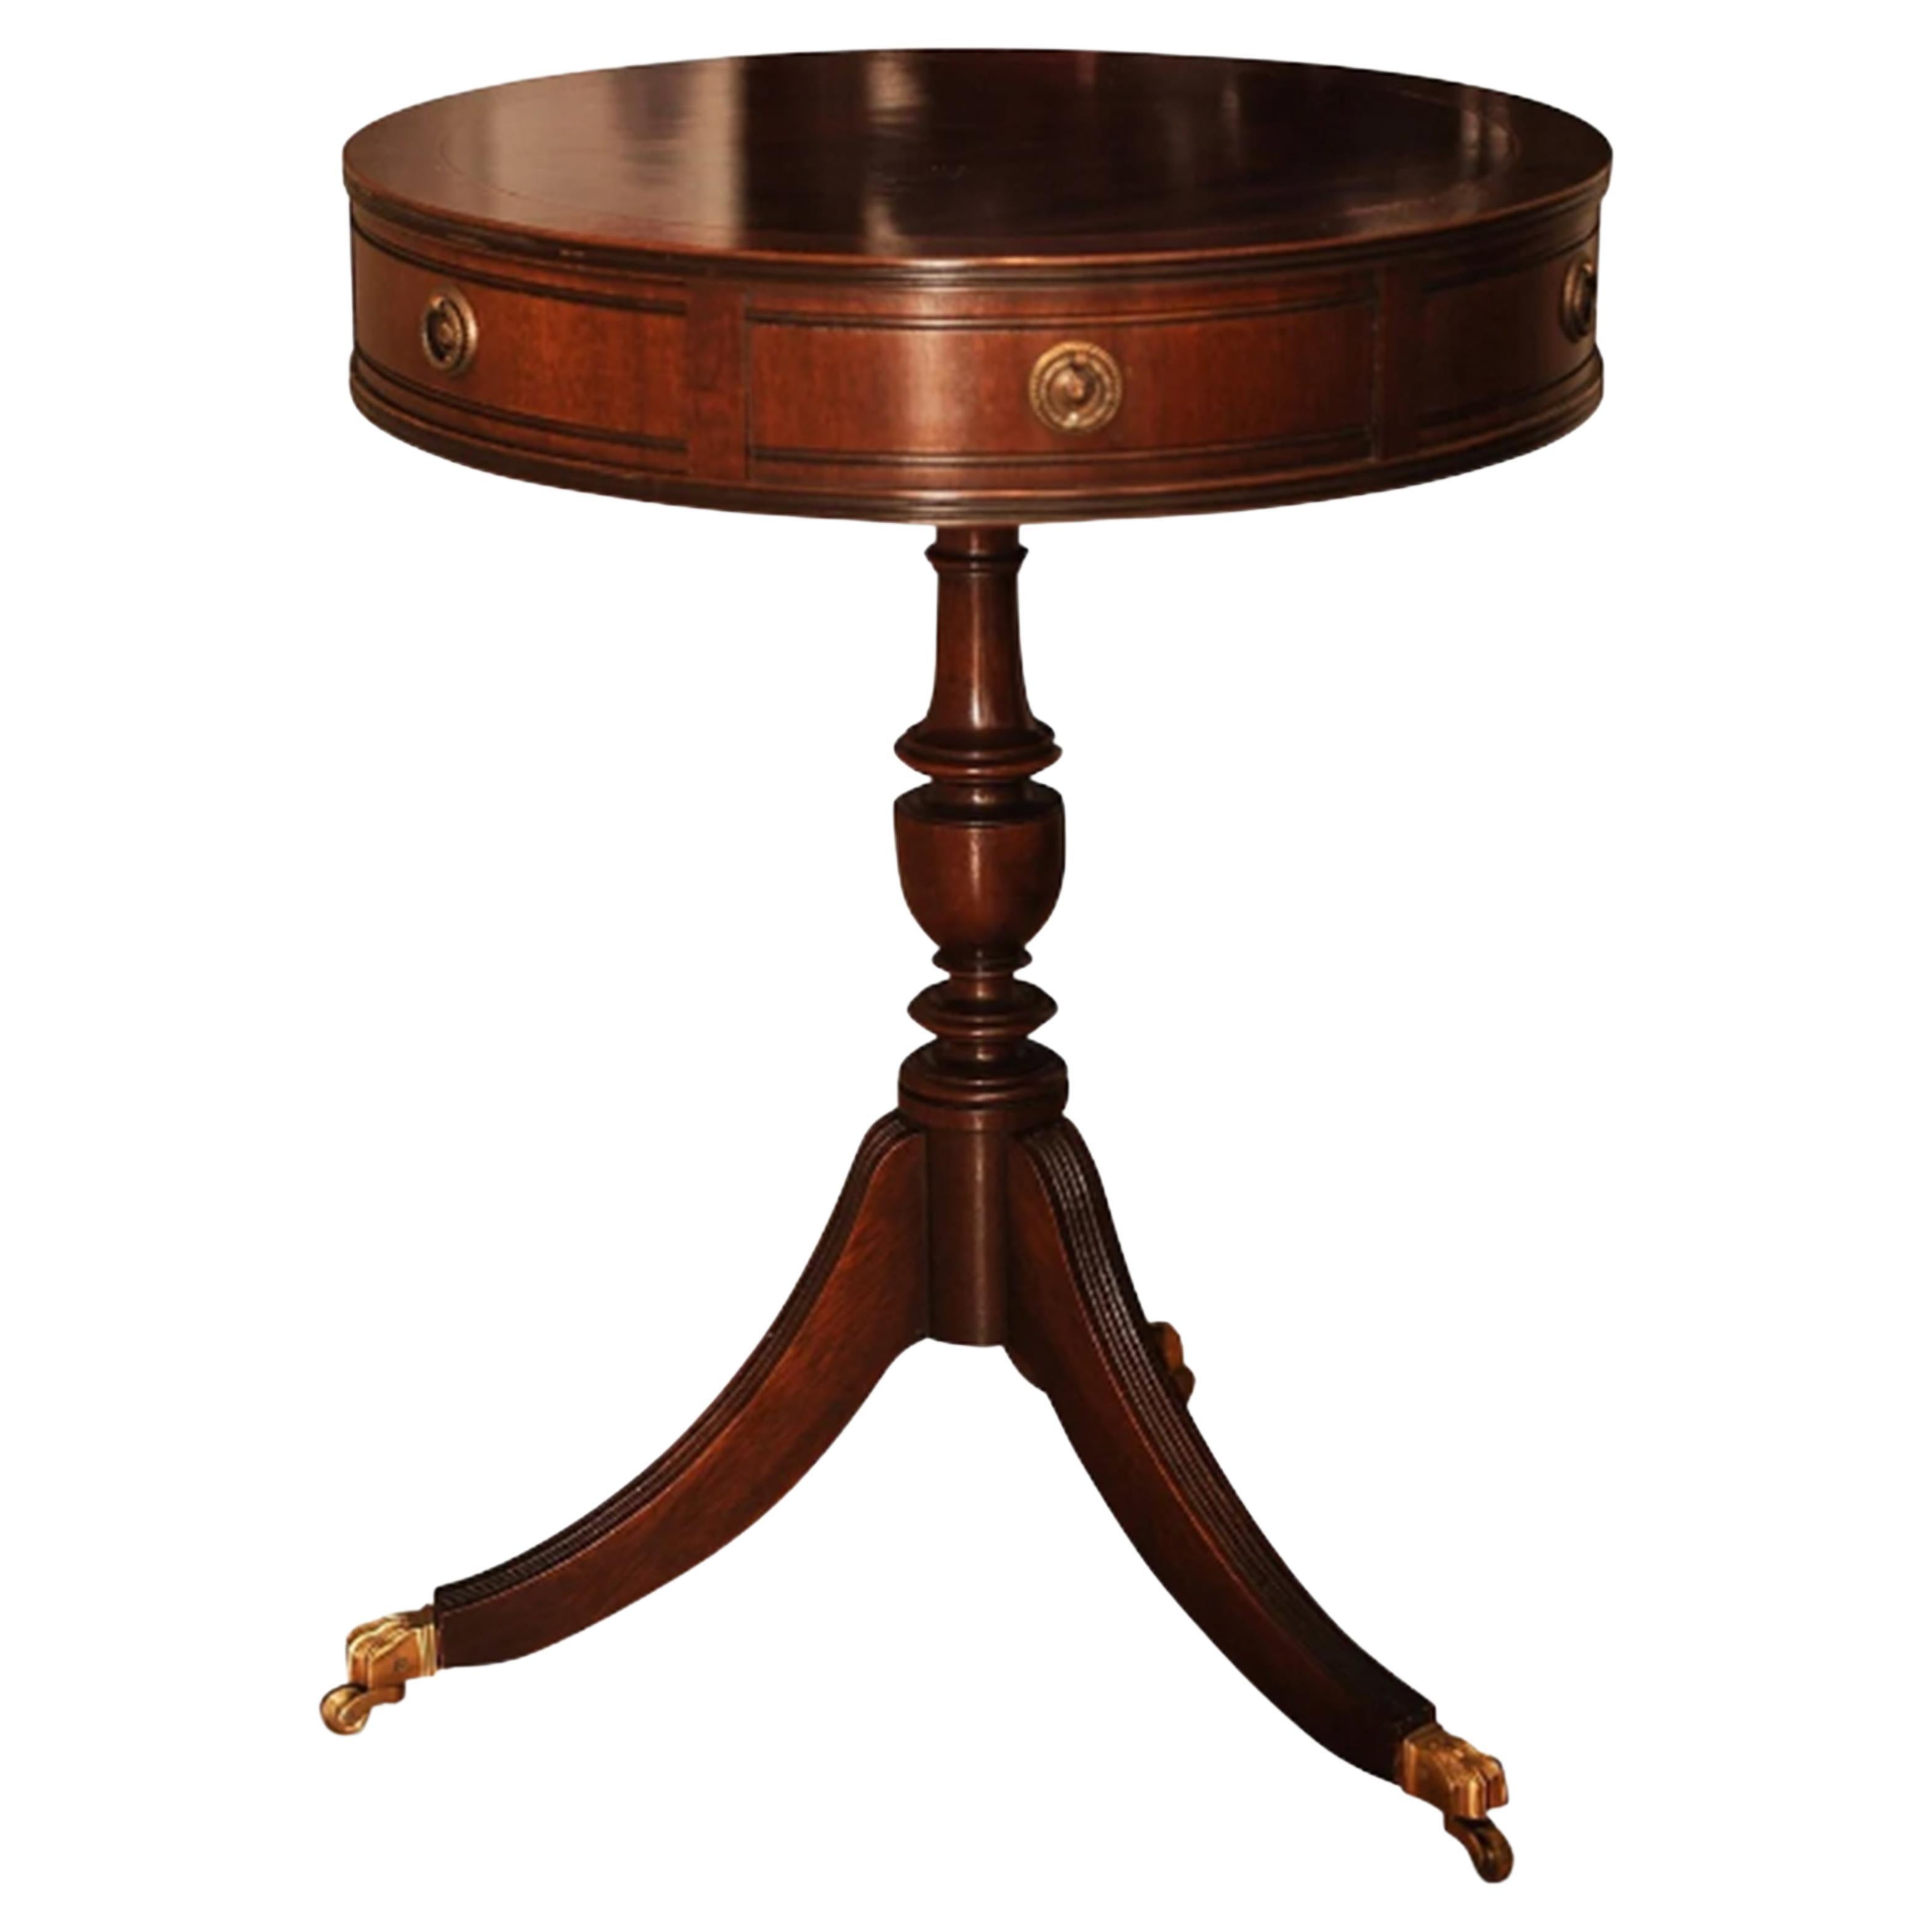 Kennedy For Harrods Regency Circular Drum Table With Brass Fixtures and Paw Feet